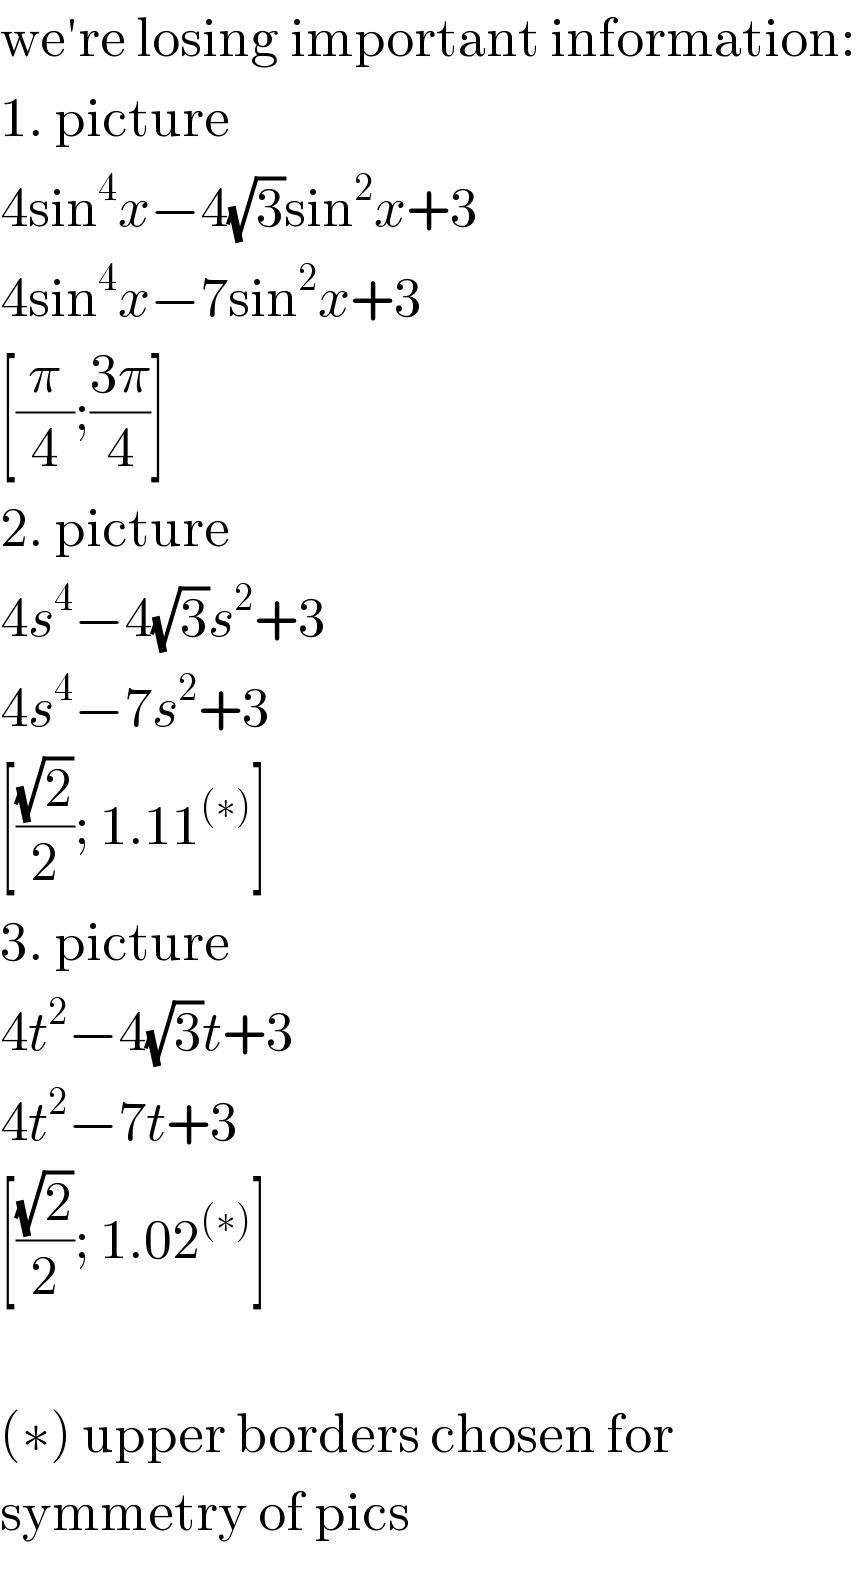 we′re losing important information:  1. picture  4sin^4 x−4(√3)sin^2 x+3  4sin^4 x−7sin^2 x+3  [(π/4);((3π)/4)]  2. picture  4s^4 −4(√3)s^2 +3  4s^4 −7s^2 +3  [((√2)/2); 1.11^((∗)) ]  3. picture  4t^2 −4(√3)t+3  4t^2 −7t+3  [((√2)/2); 1.02^((∗)) ]    (∗) upper borders chosen for  symmetry of pics  